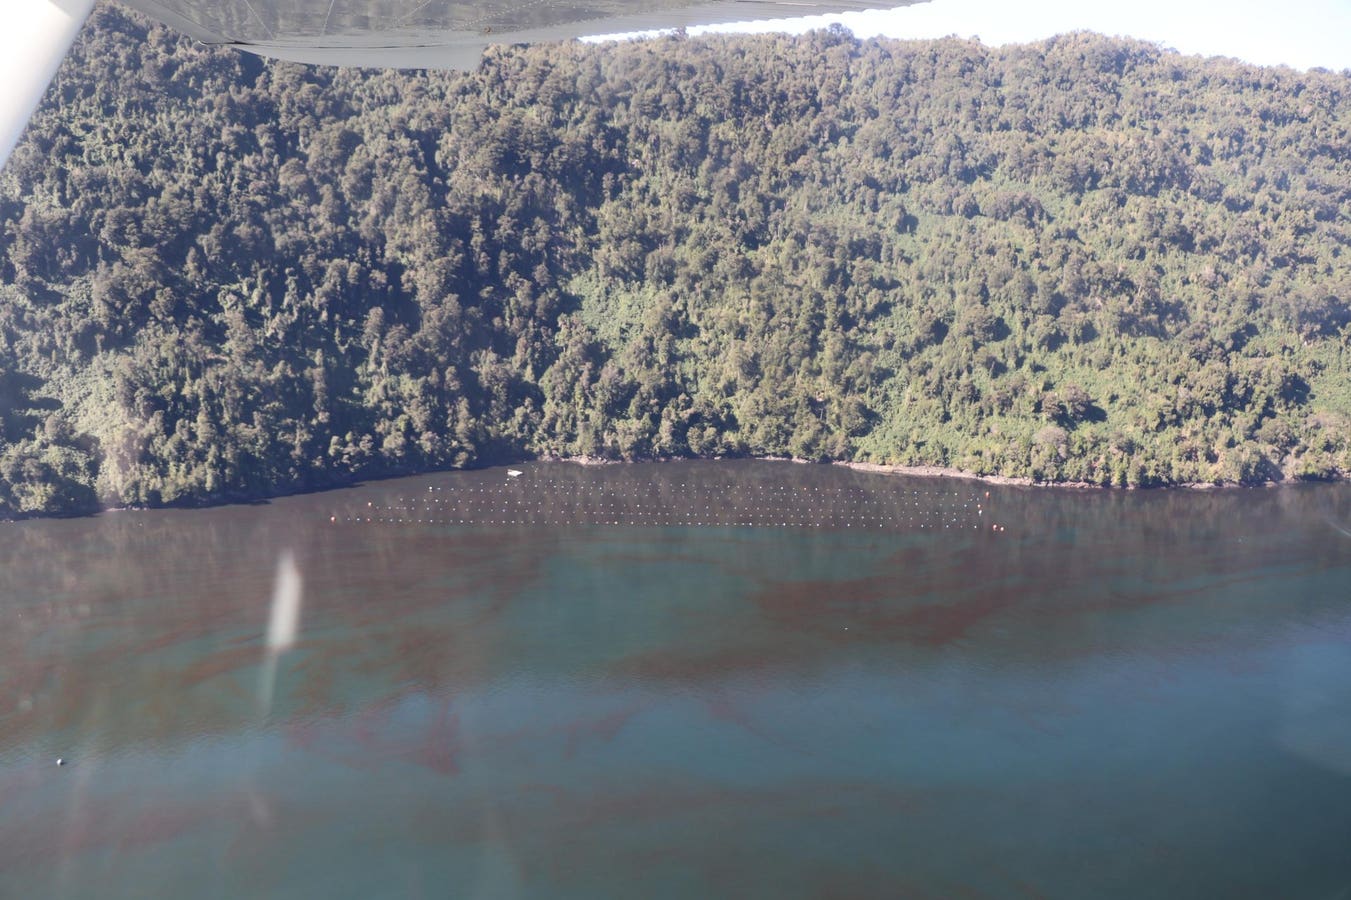 Is Climate Change Behind A Mysterious Algal Bloom In Patagonia?